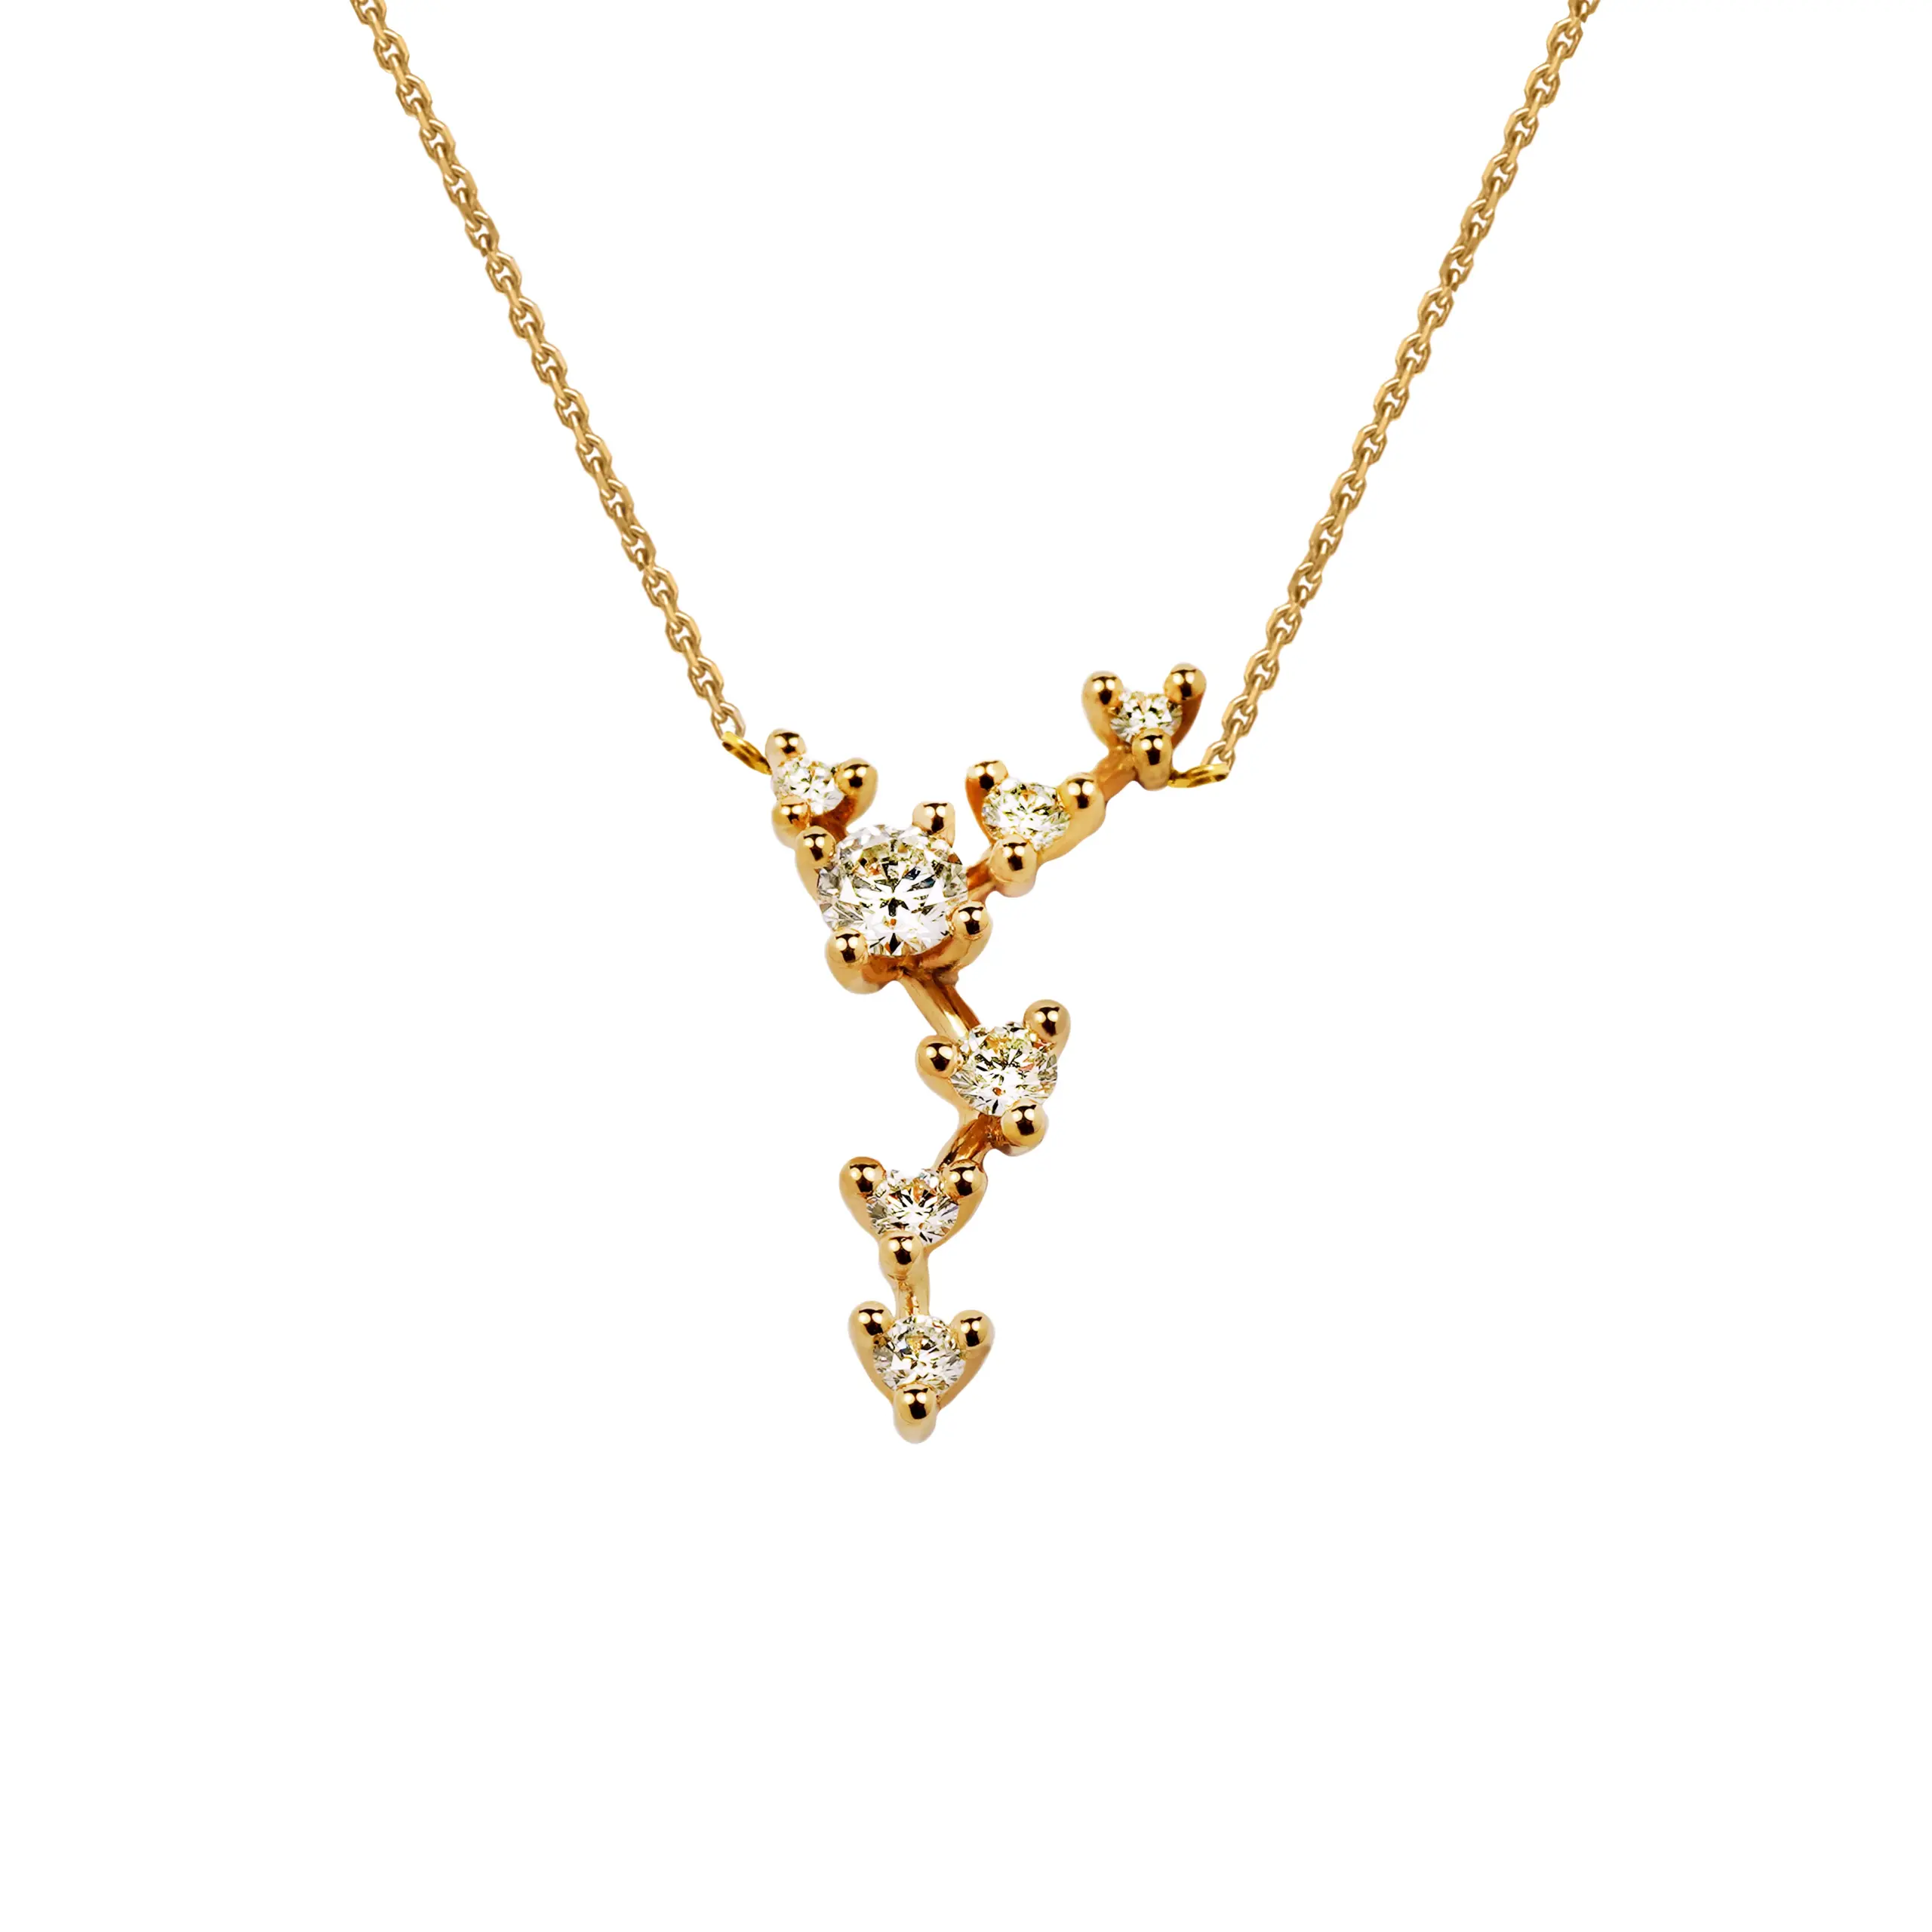 Blossom Necklace - Yellow Gold & Diamonds